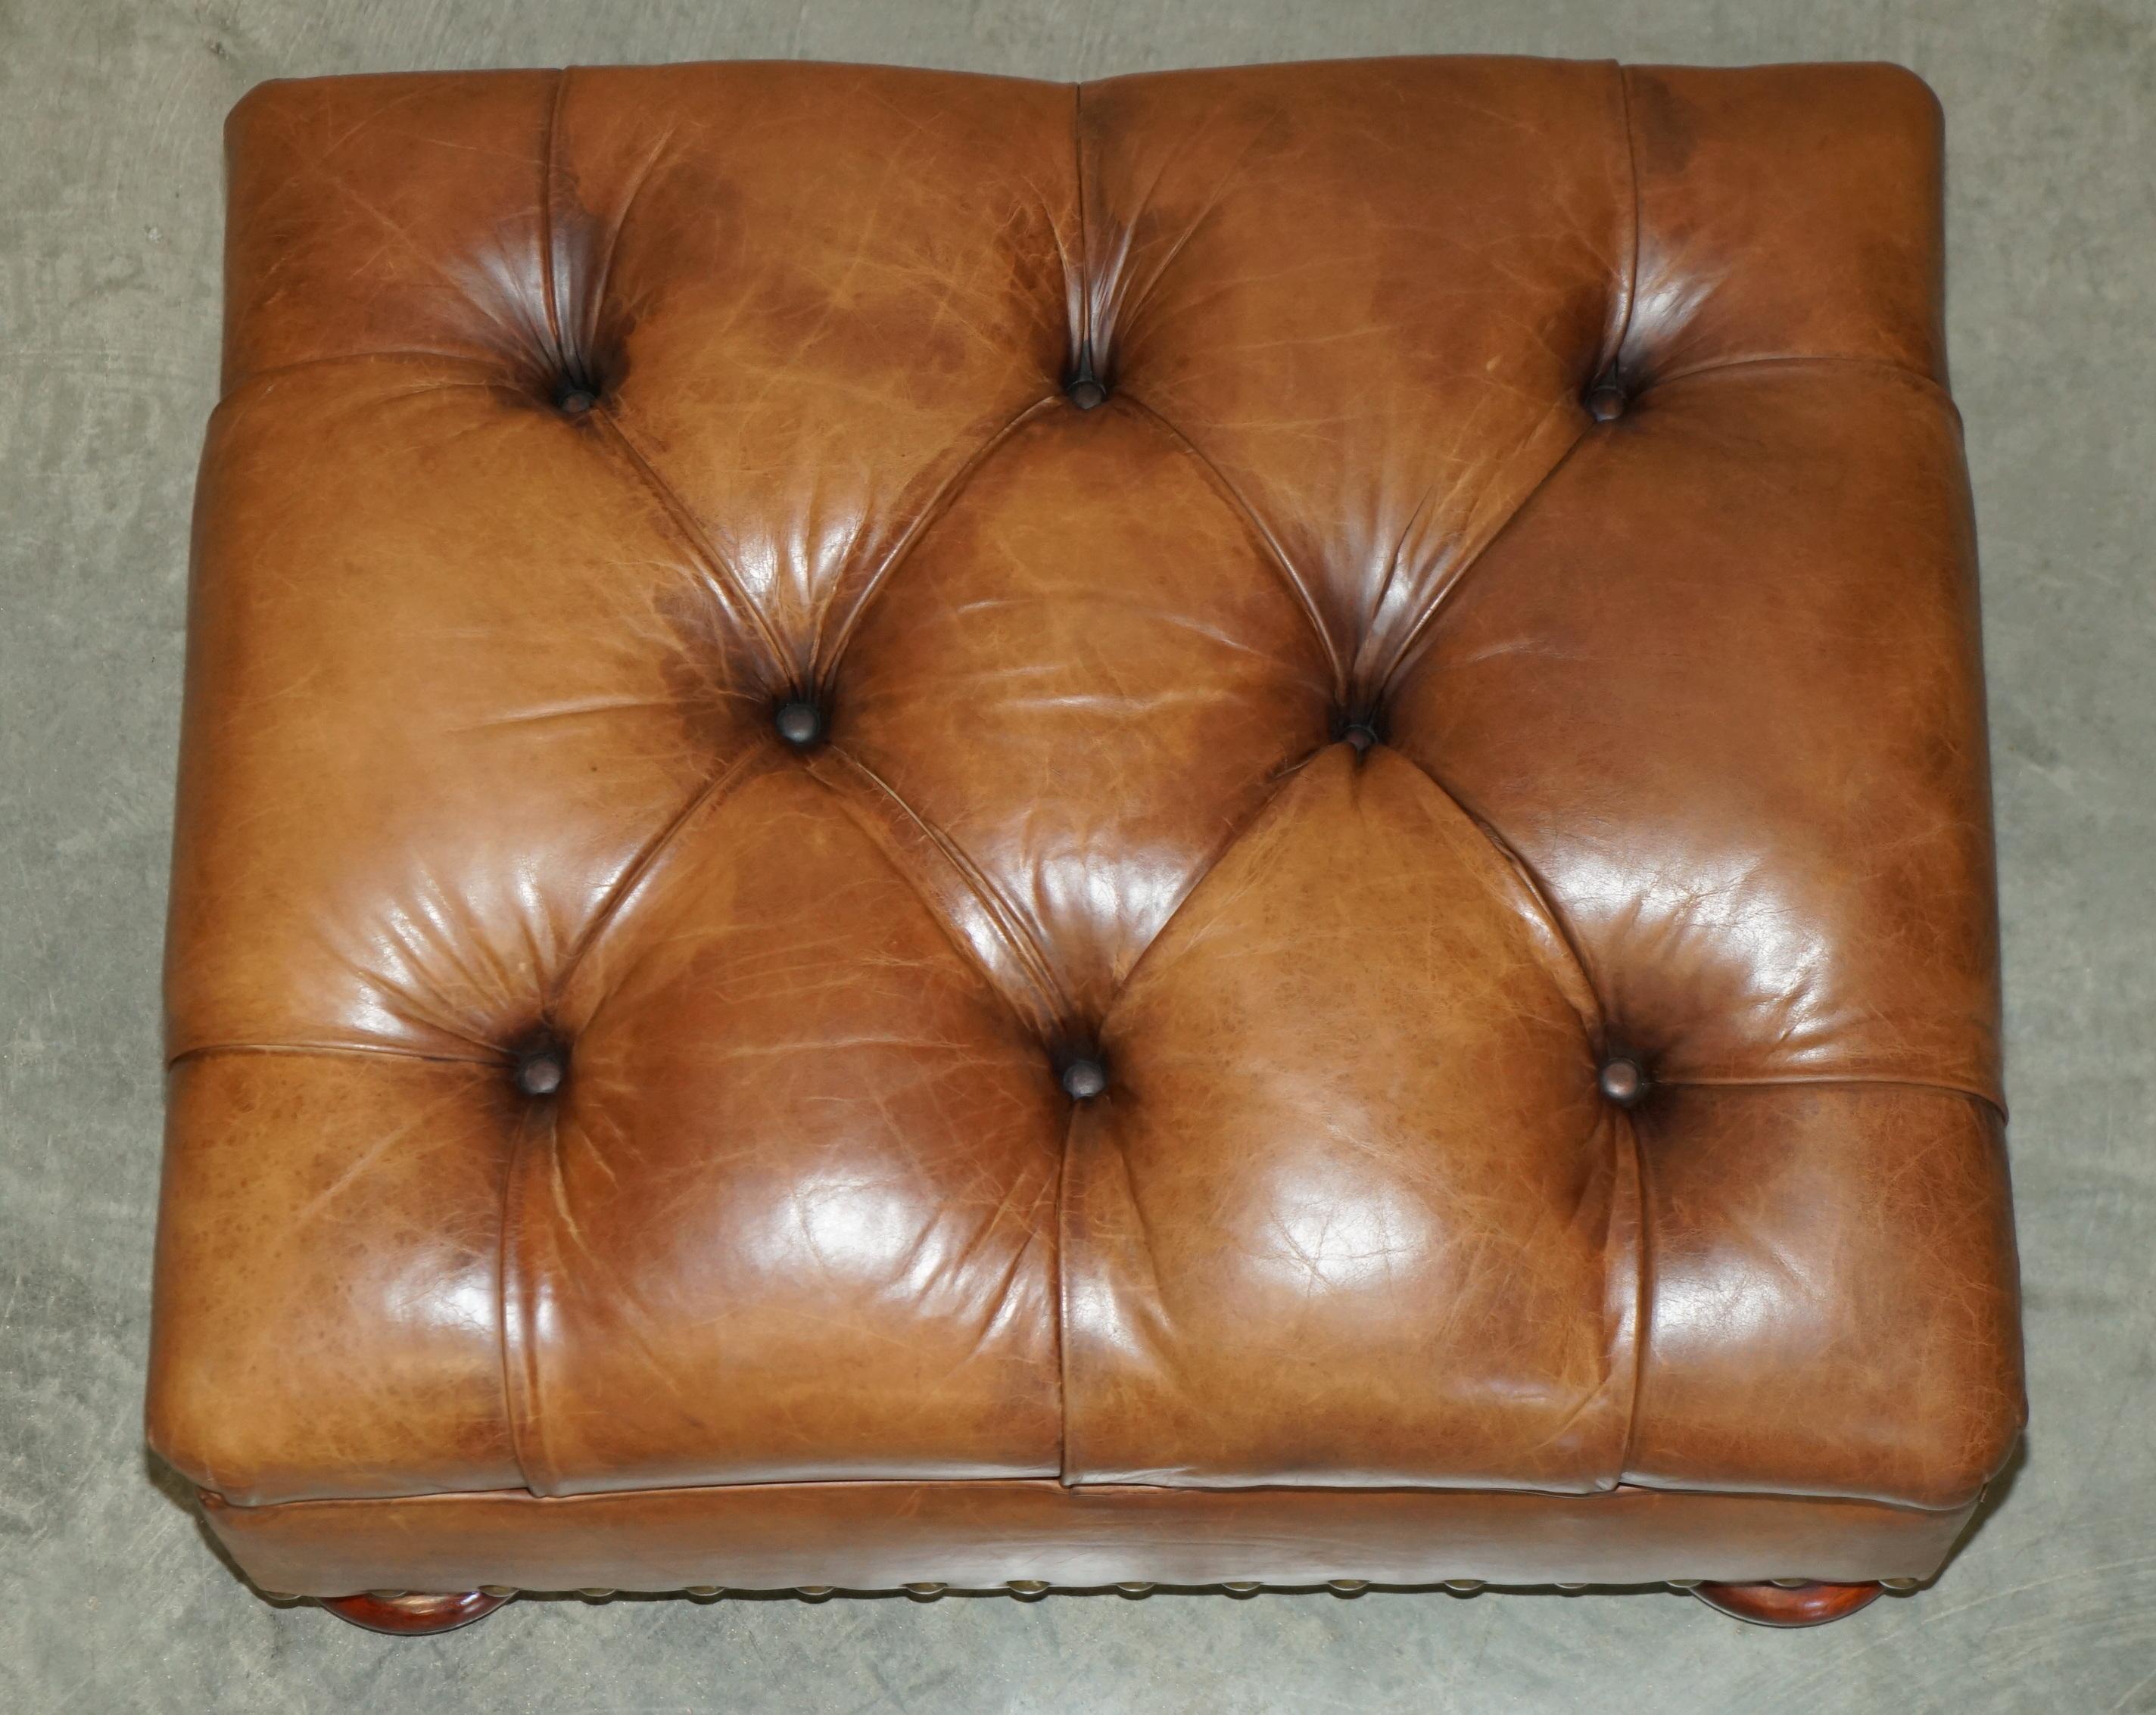 RALPH LAUREN WRITER'S CHESTERFIELD FOOTSTOOL OTTOMAN IN HERiTAGE BROWN LEATHER 3